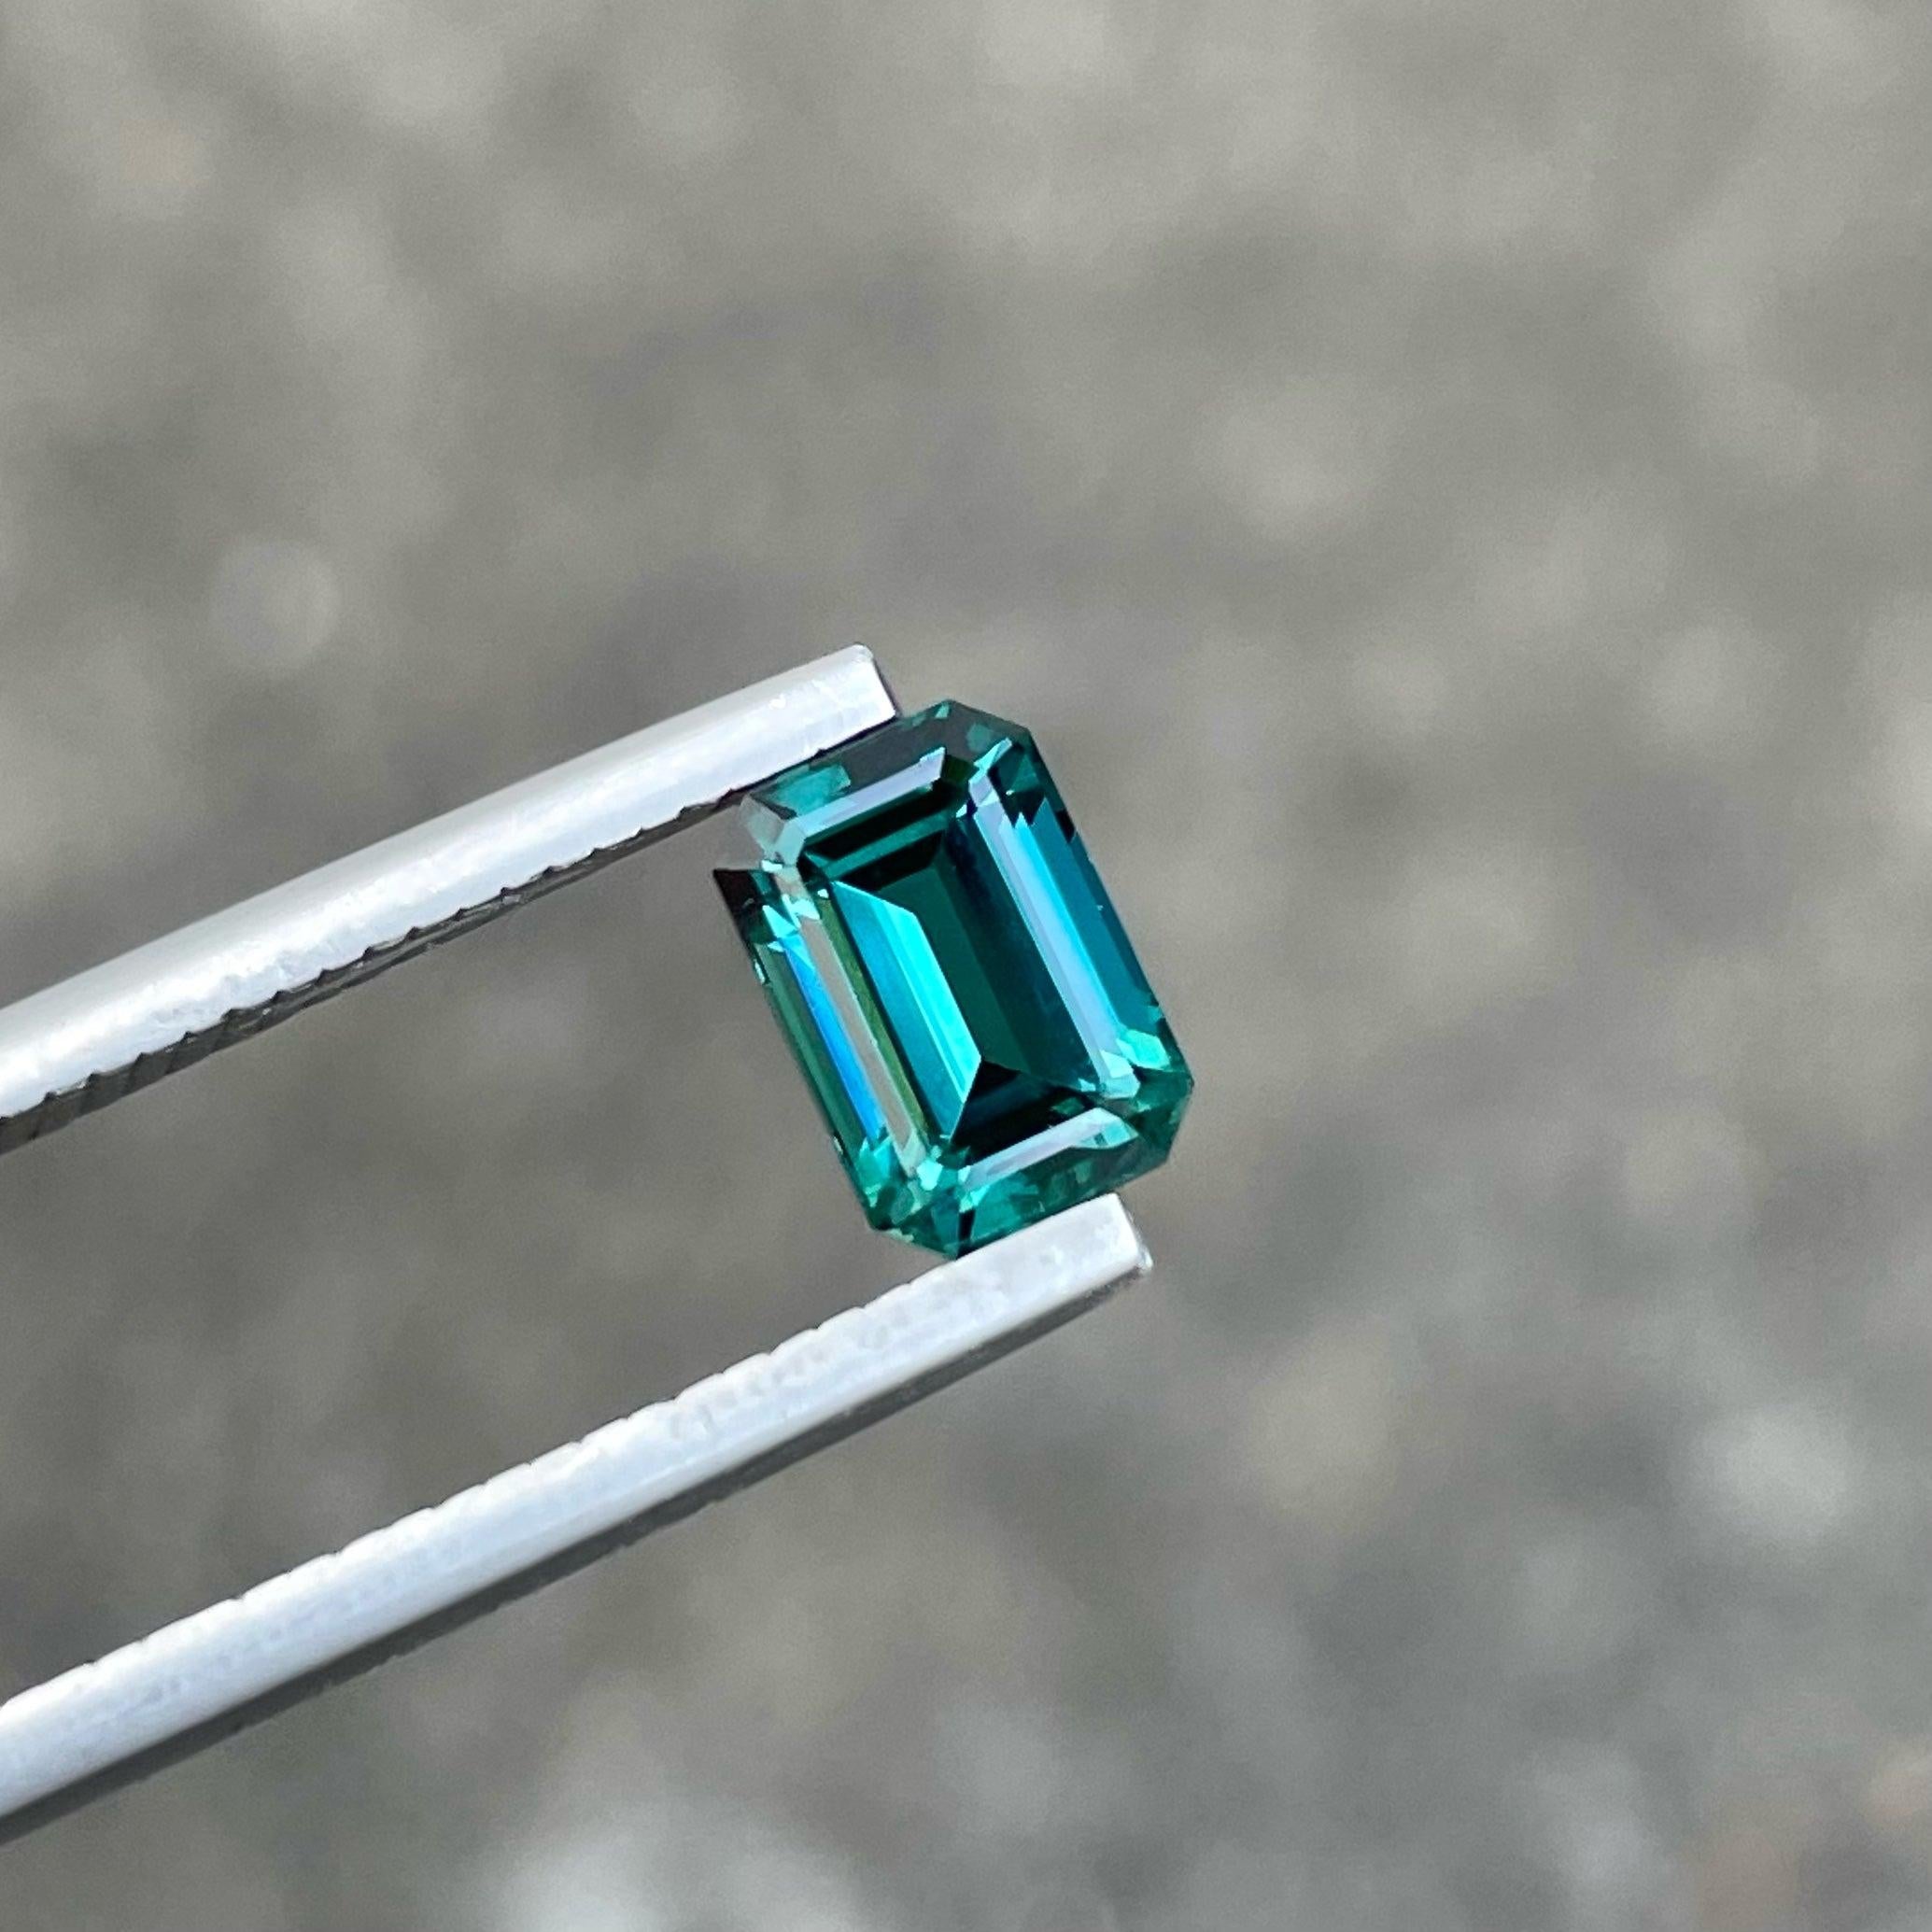 Lovely Natural Greenish Blue Tourmaline Gemstone, available for sale at wholesale price, VVS Clarity, loose gemstone, Emerald Cut, 1.50 carats certified Tourmaline from Afghanistan.

Product Information:
GEMSTONE TYPE:	Lovely Natural Greenish Blue